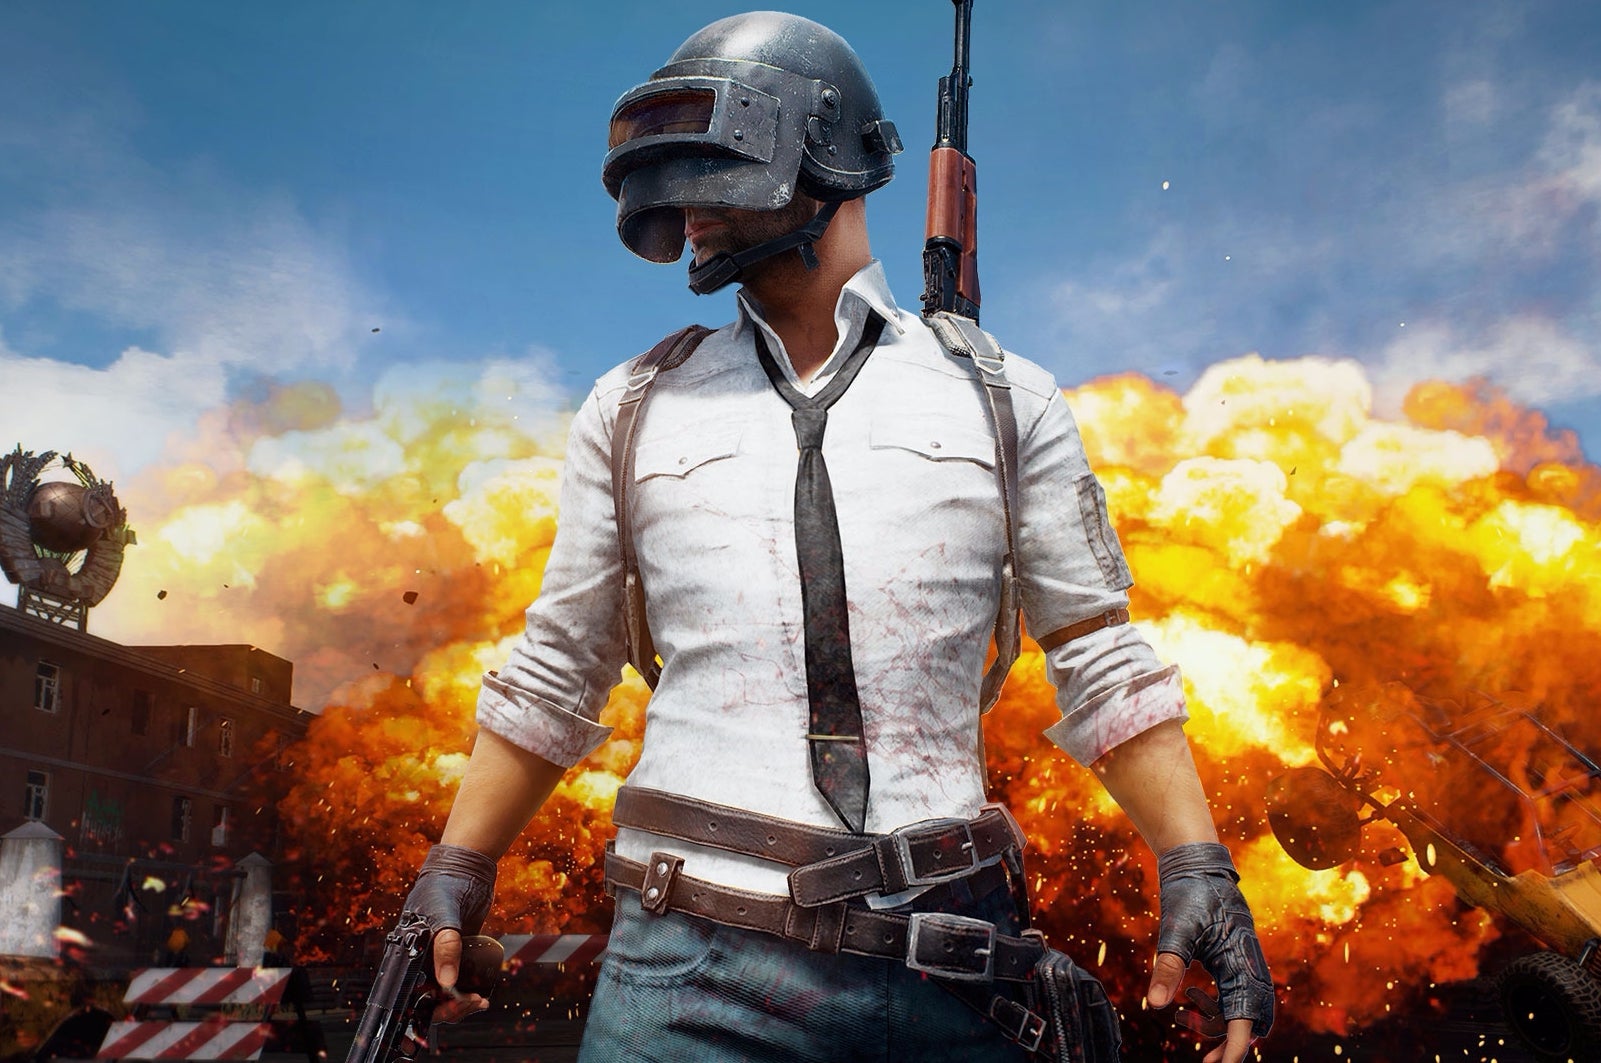 150.7m of us have clocked up 16.3bn hours in PUBG: Battlegrounds so far